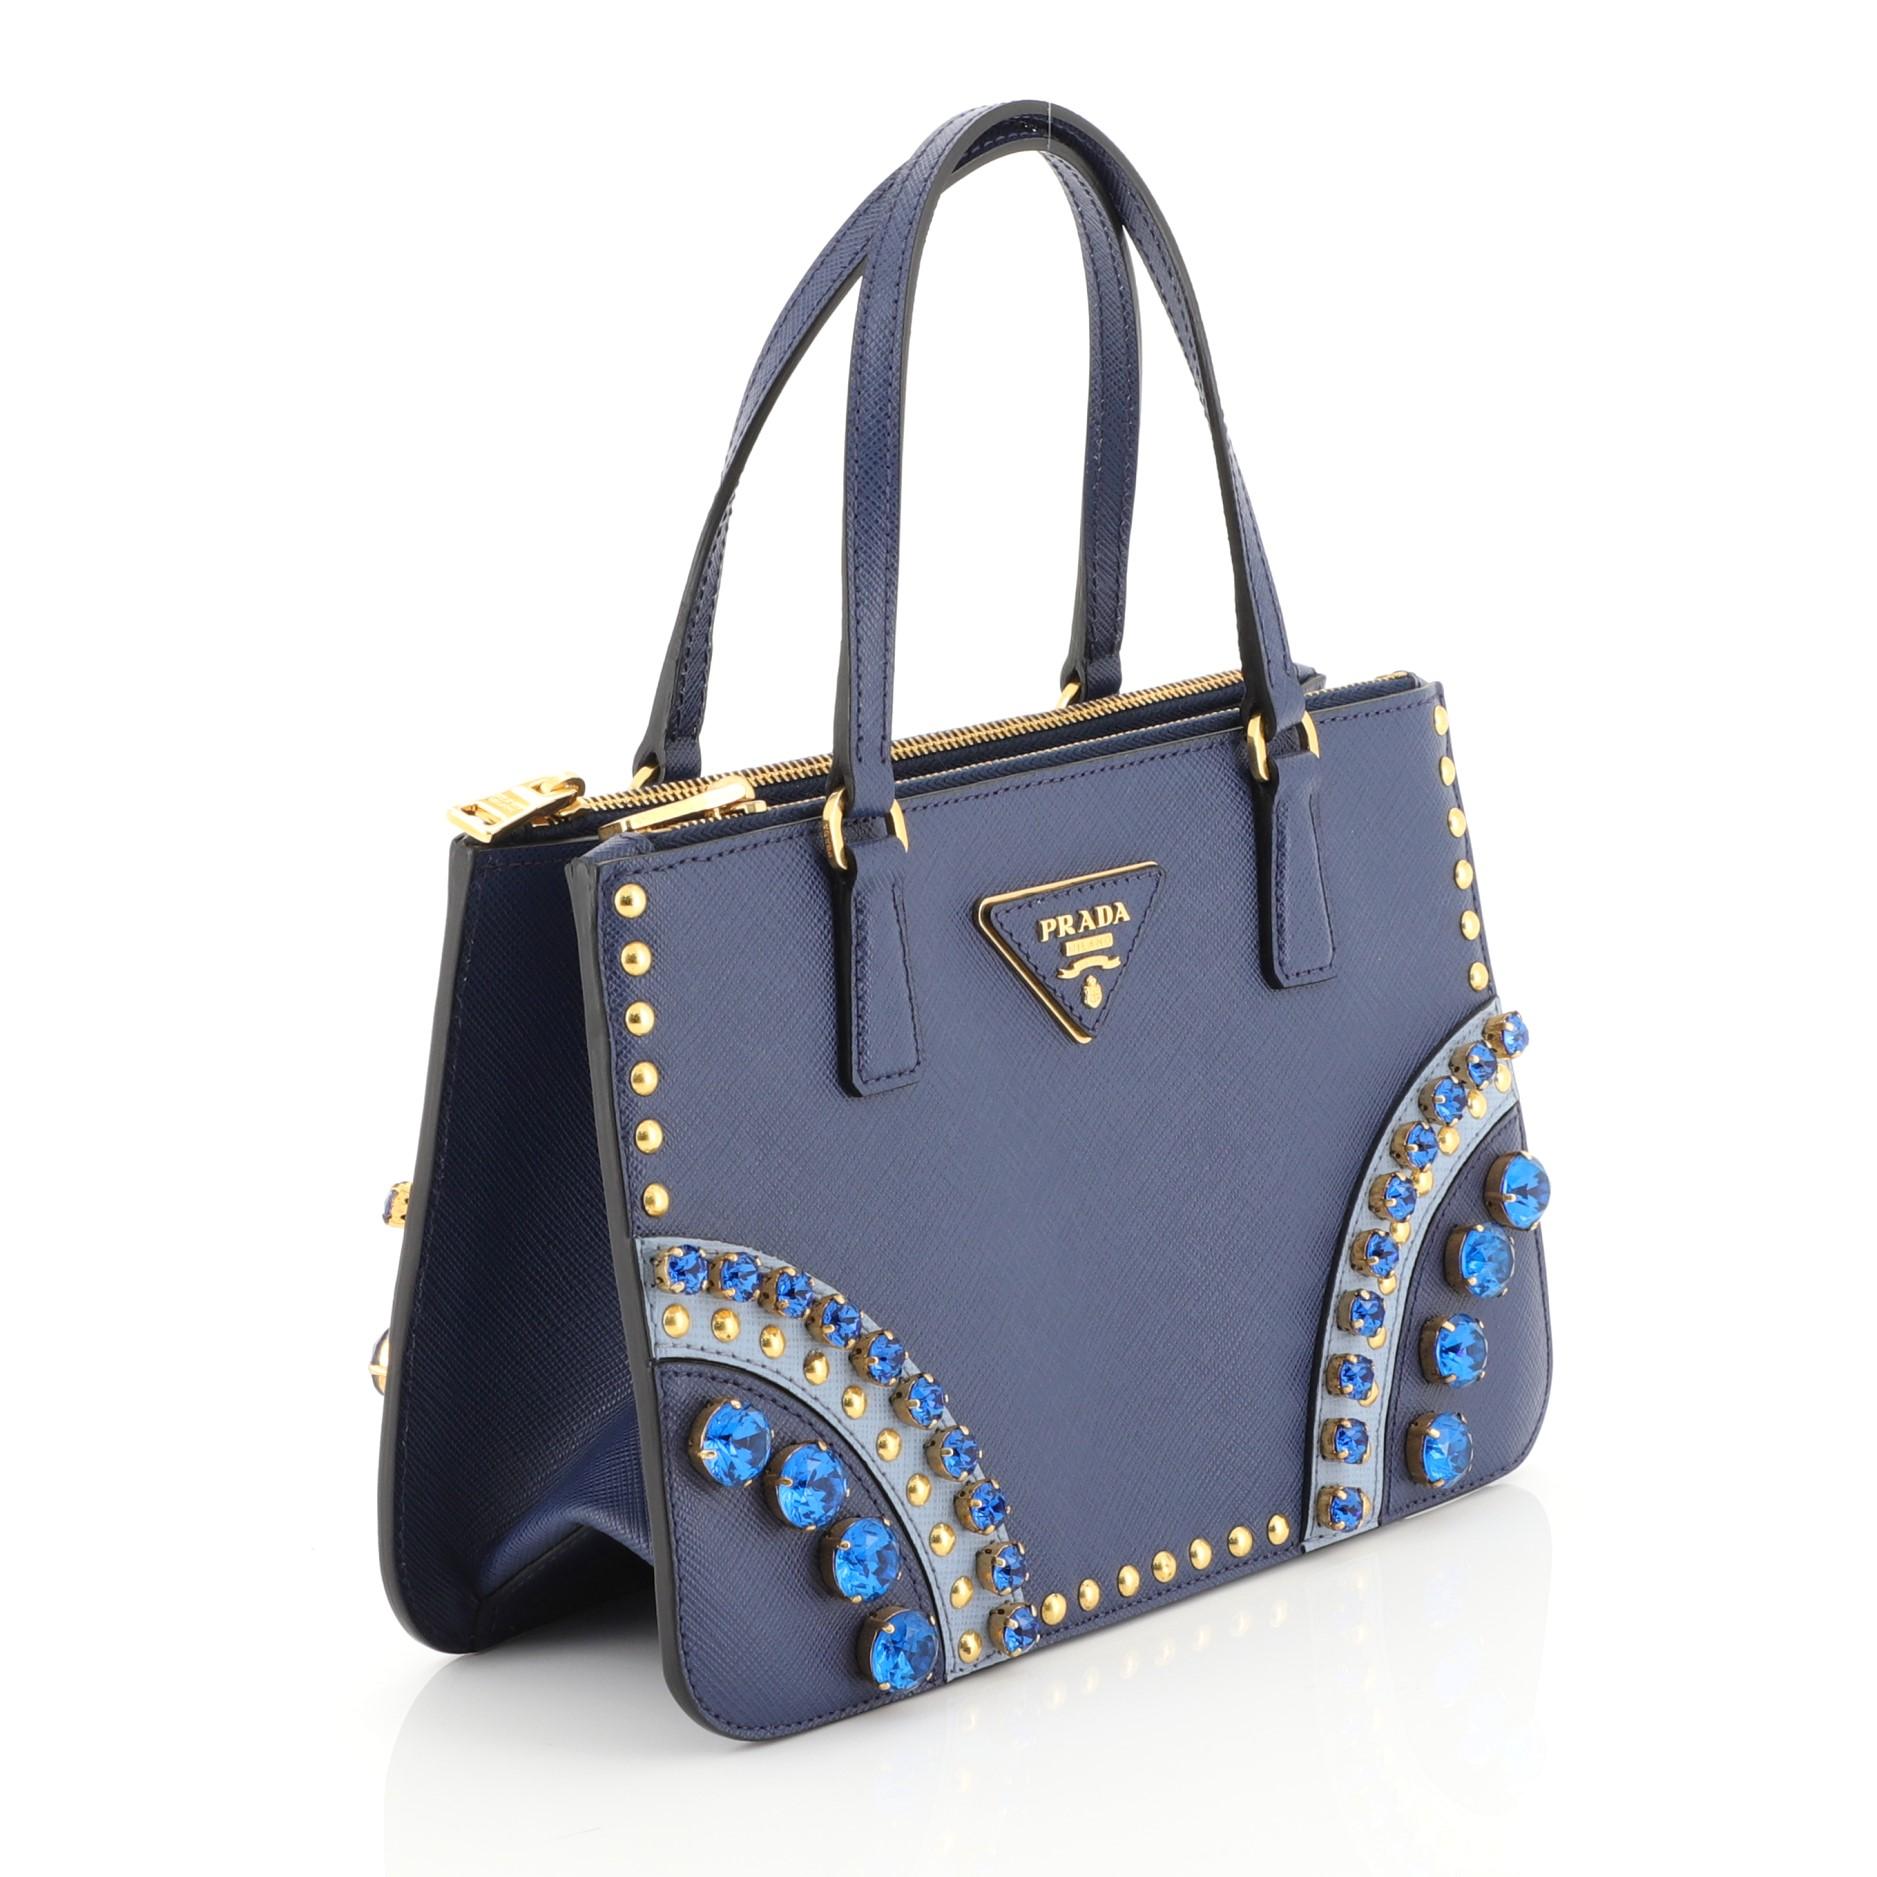 This Prada Double Zip Tote Crystal Embellished Saffiano Leather Mini, crafted from blue embellished saffiano leather, features dual rolled leather handles, raised Prada plate and gold-tone hardware. It opens to a black leather interior with two zip